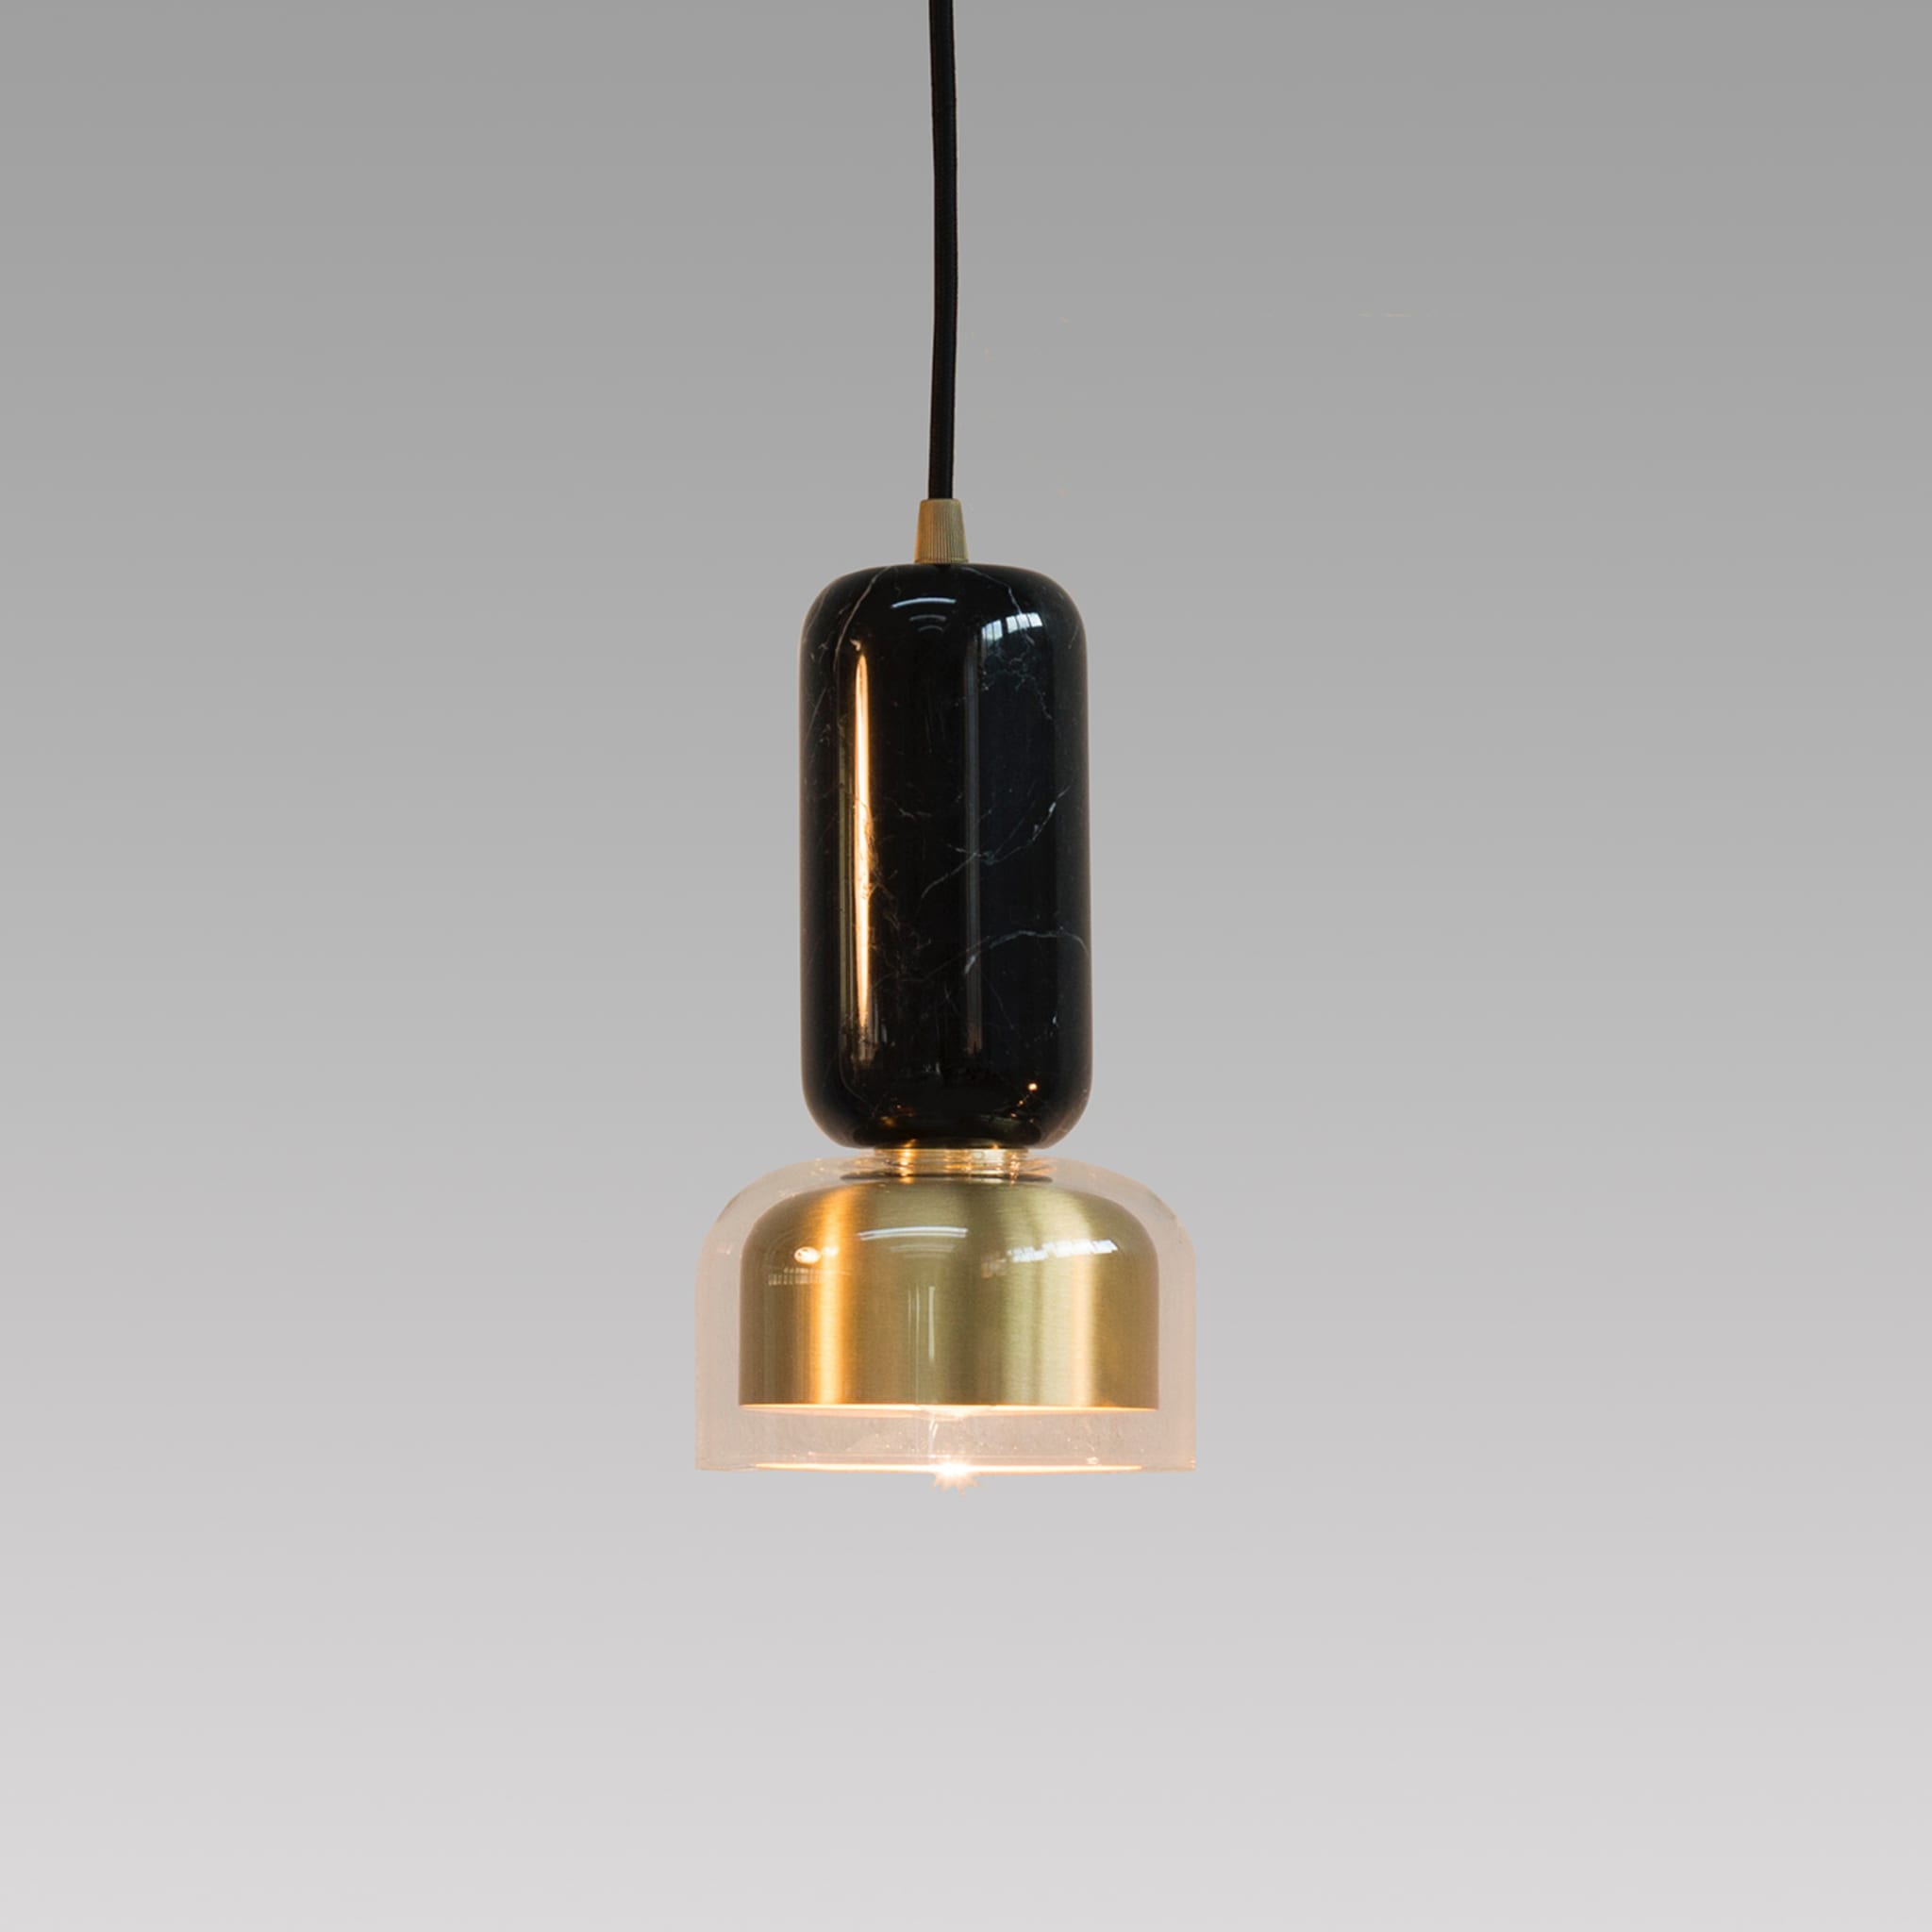 "Andromeda" Pendant Lamp in Black Marquinha Marble and Satin Brass - Alternative view 1